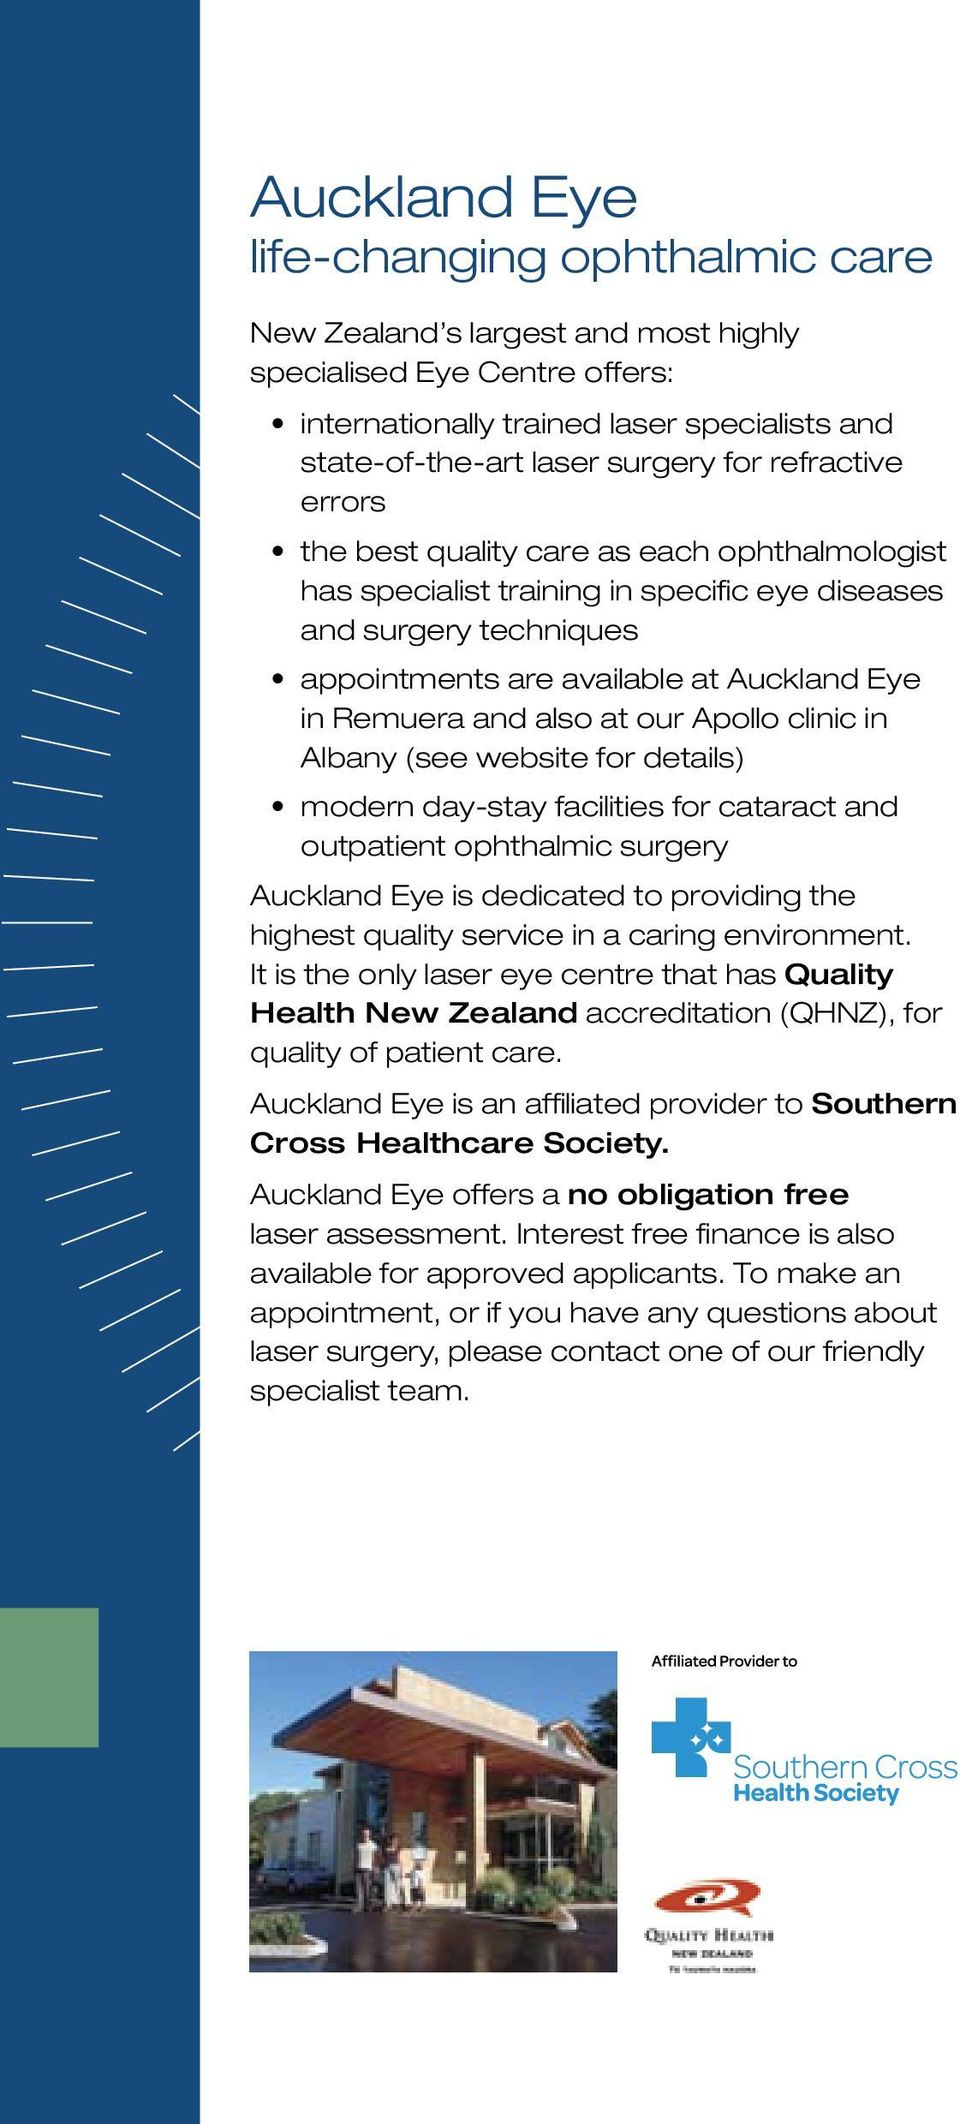 at our Apollo clinic in Albany (see website for details) modern day-stay facilities for cataract and outpatient ophthalmic surgery Auckland Eye is dedicated to providing the highest quality service